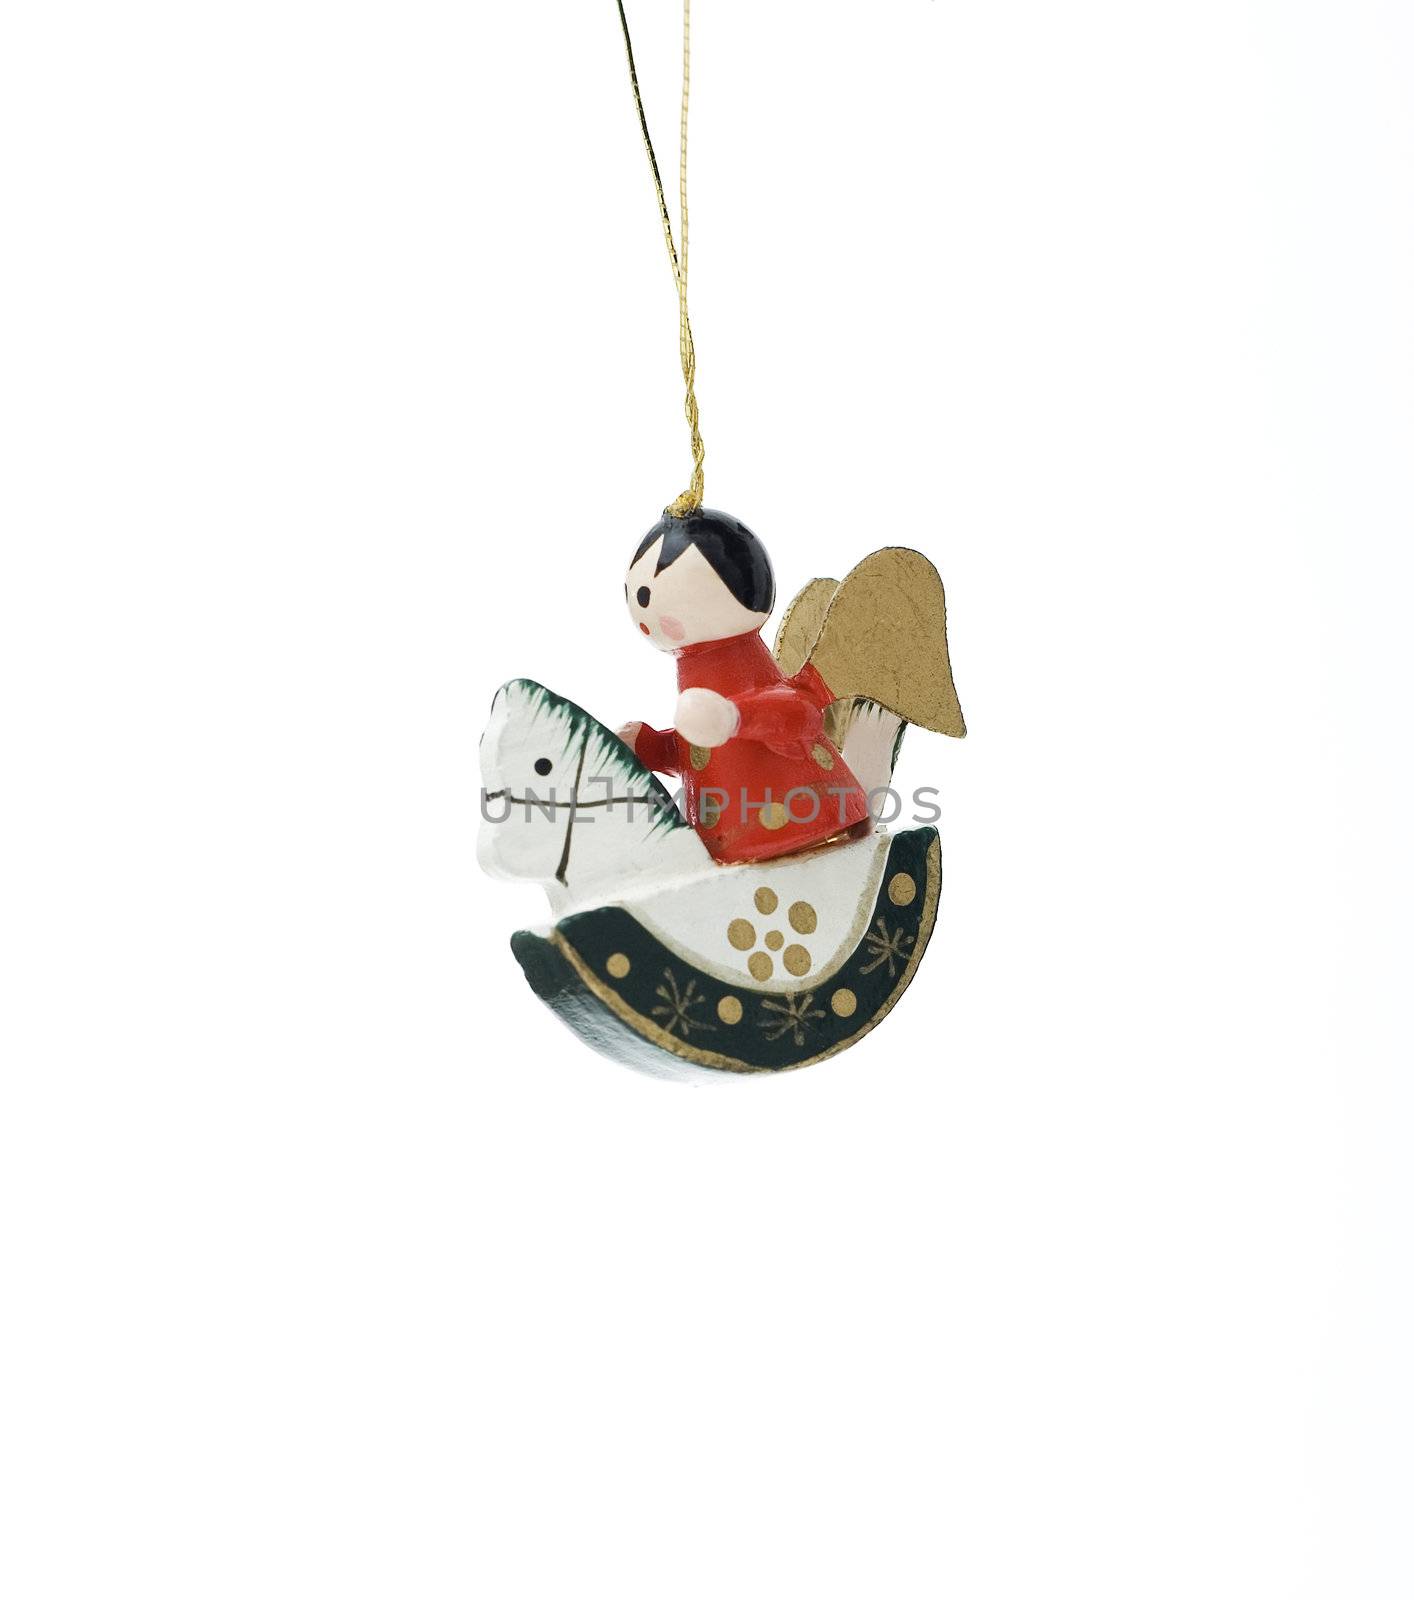 Wooden Christmas decoration with angel on horse isolated on white